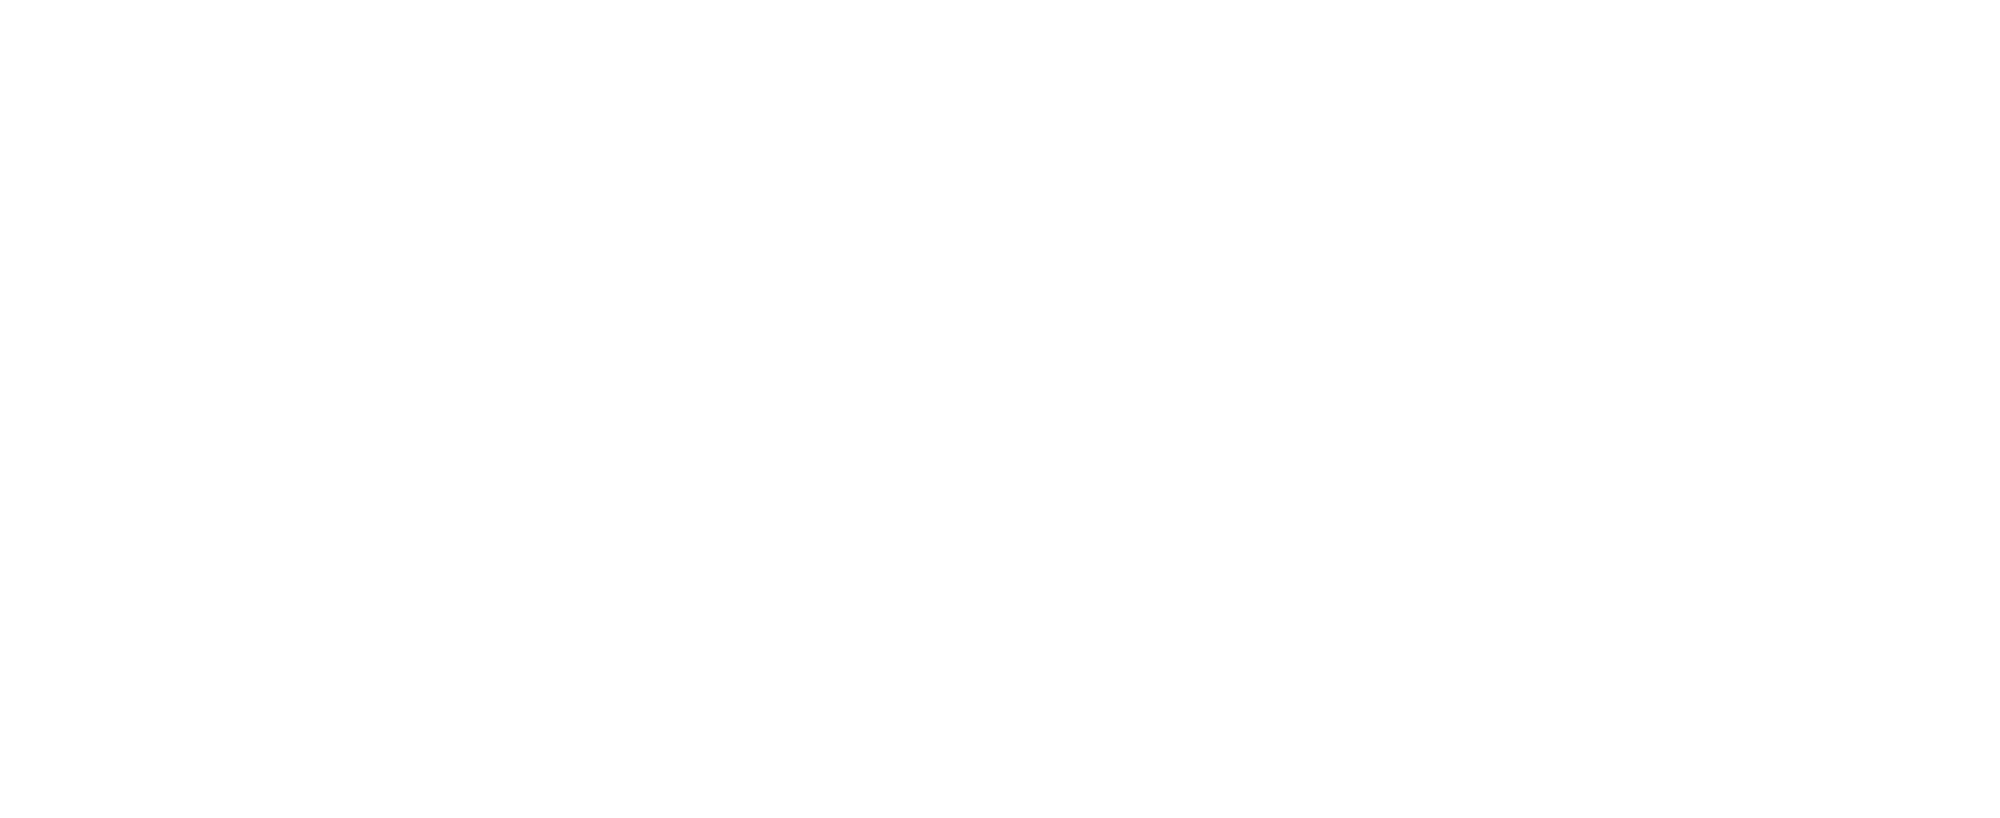 The DFS Financial Group